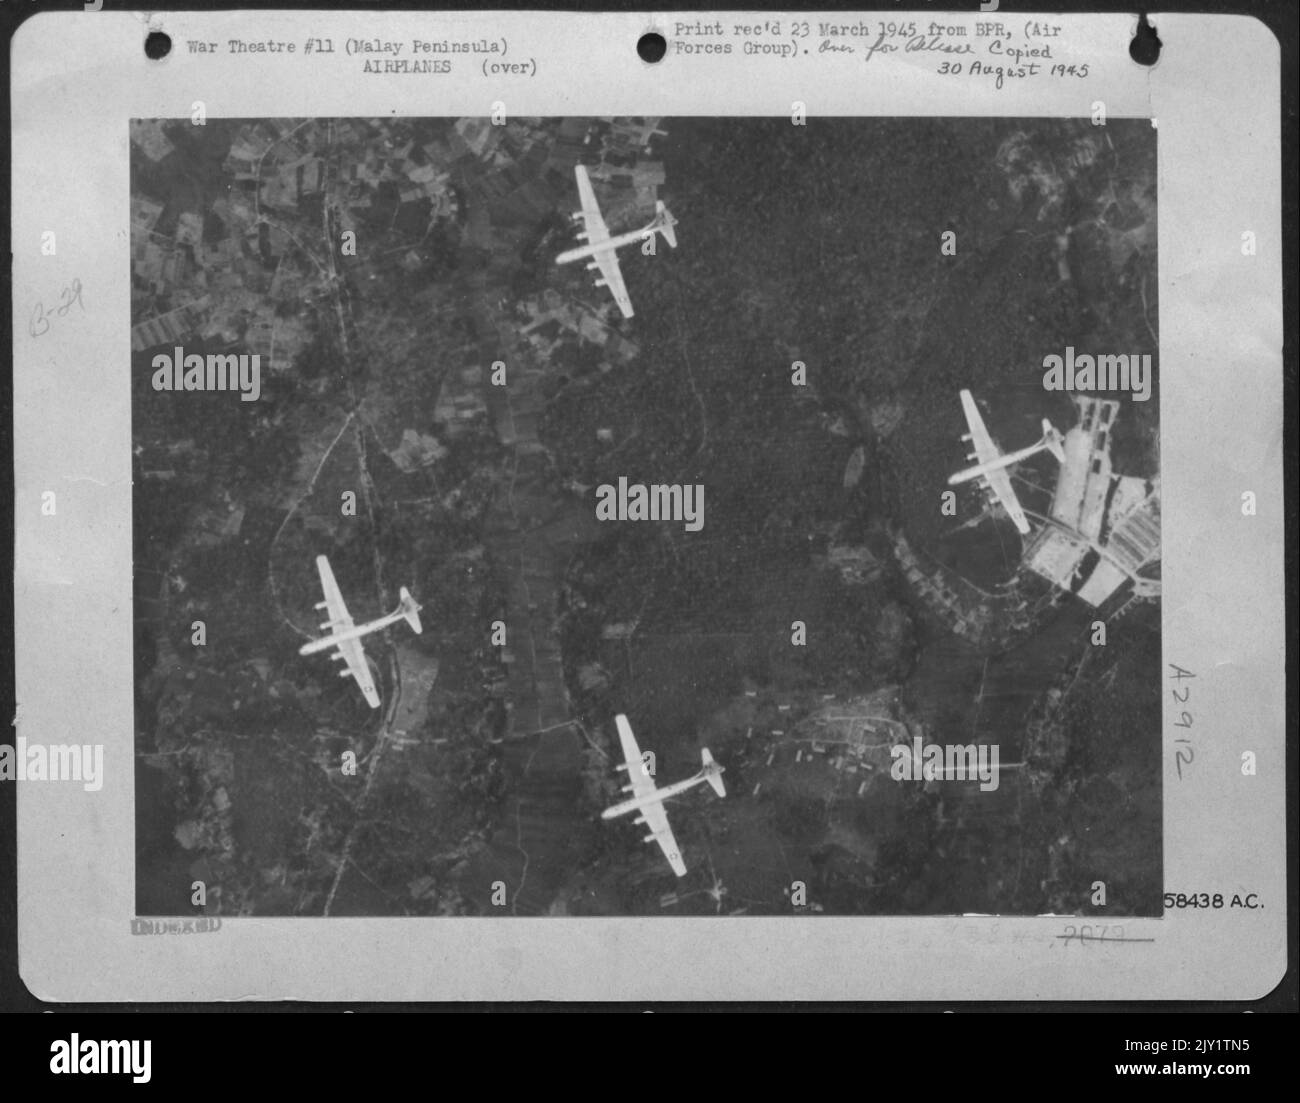 In A Mission Mounted From Bases In India, Boeing B-29S Of Brig. Gen Roger M. Ramey's 20Th Bomber Command Struck The Work Shop Area Of The Singapore Naval Base. Pictured Here Are Four Superfortresses Flying Over A Part Of The Important Japaneseanese-Held Stron Stock Photo